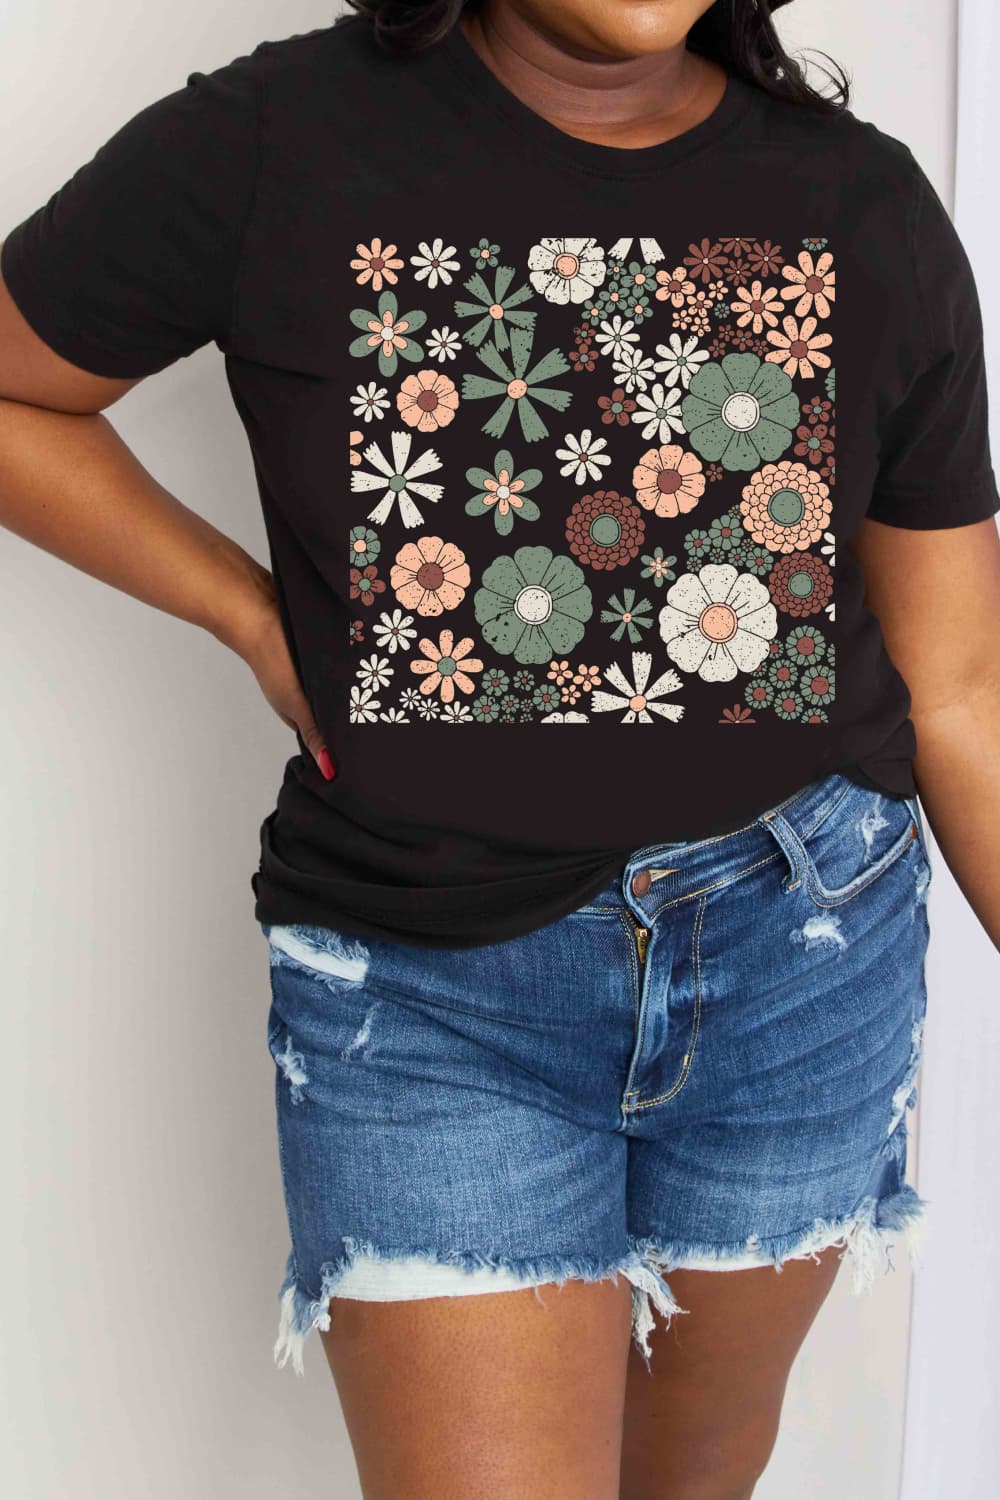 Gray Simply Love Flower Graphic Cotton Tee